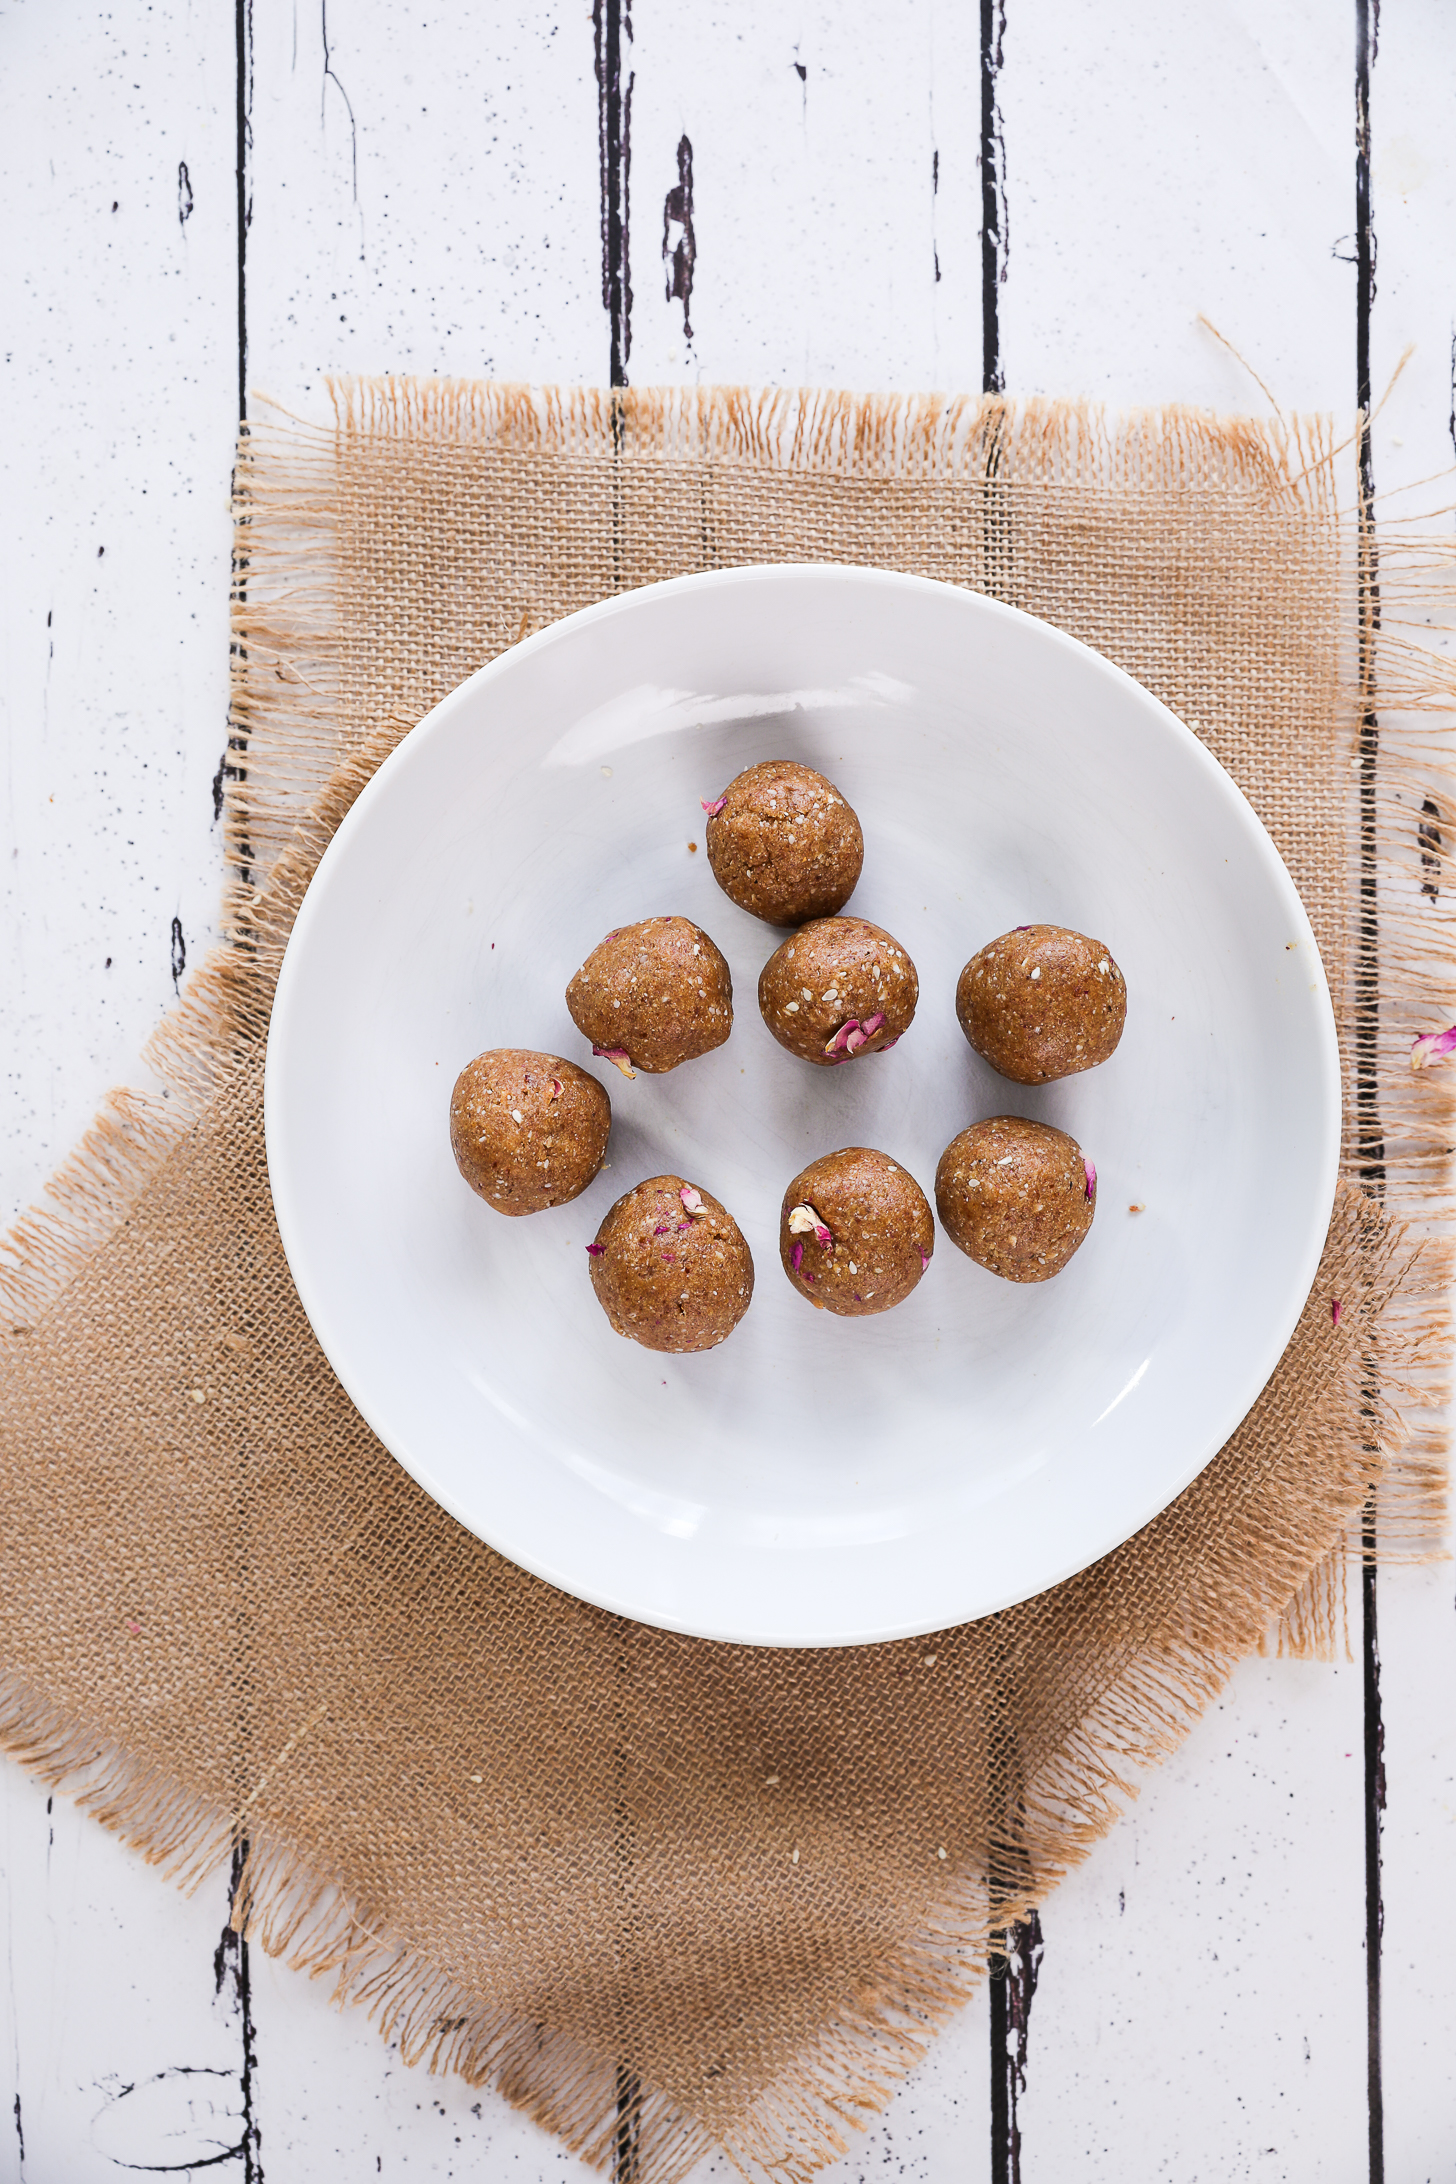 Eight brown bliss balls in a white plate.